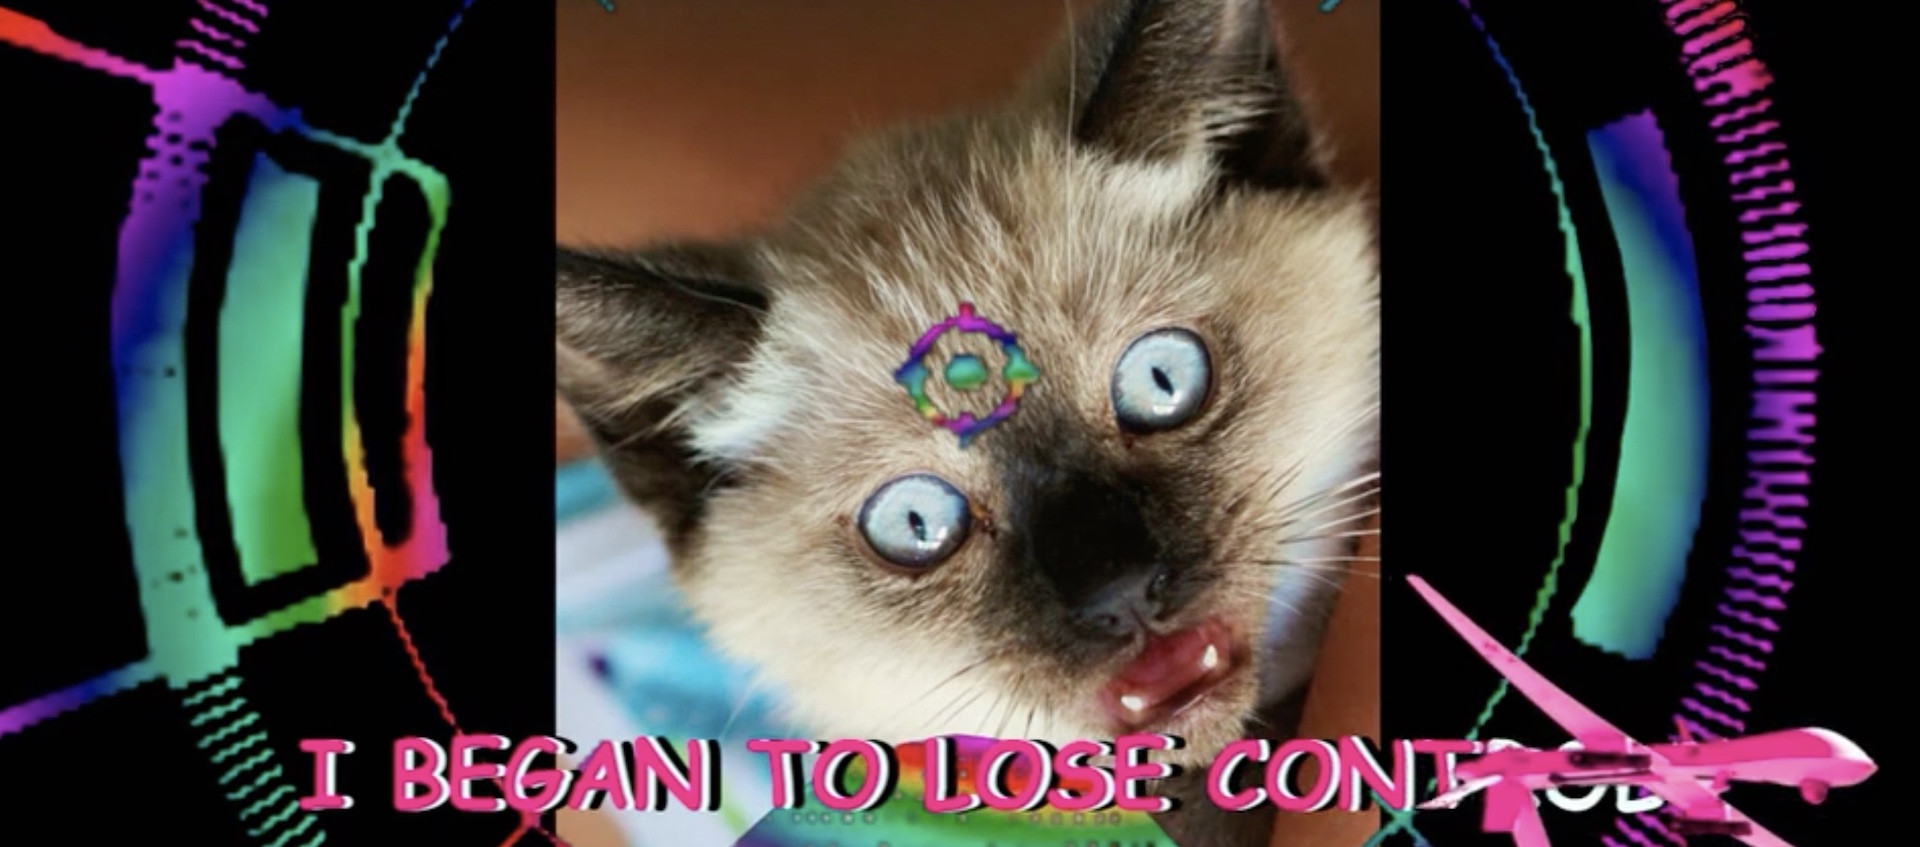 An altered image of a cat with wide eyes about karaoke lyrics that read "I began to lose control" from a work by the art collective Chicks on Speed